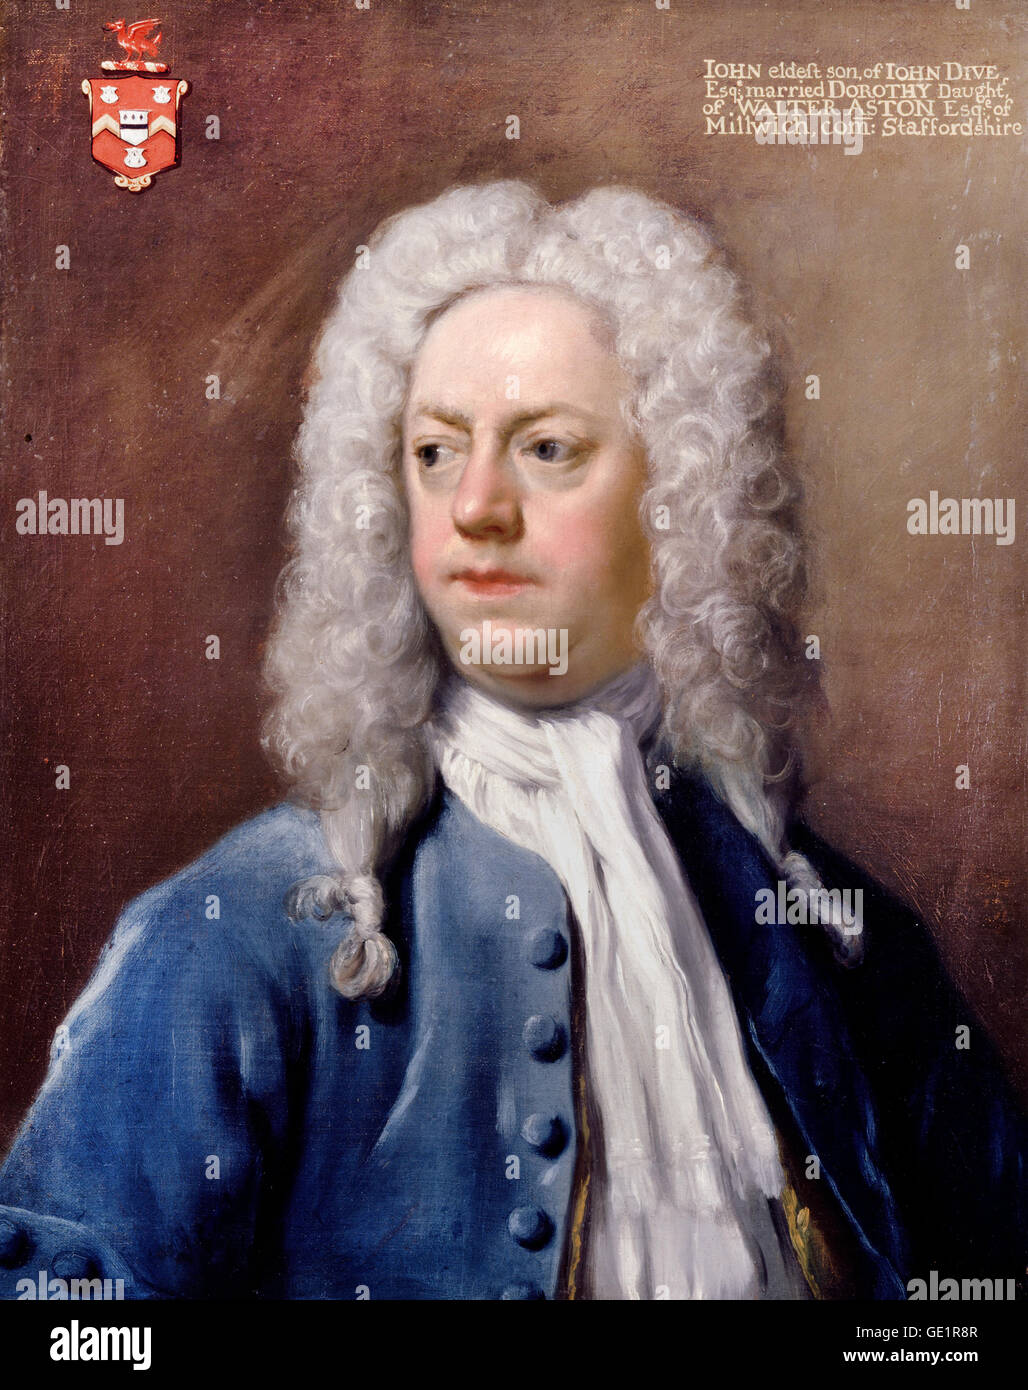 Hans Hysing, John Dive. Circa 1730. Oil on canvas. Dulwich Picture Gallery, London, England. Stock Photo